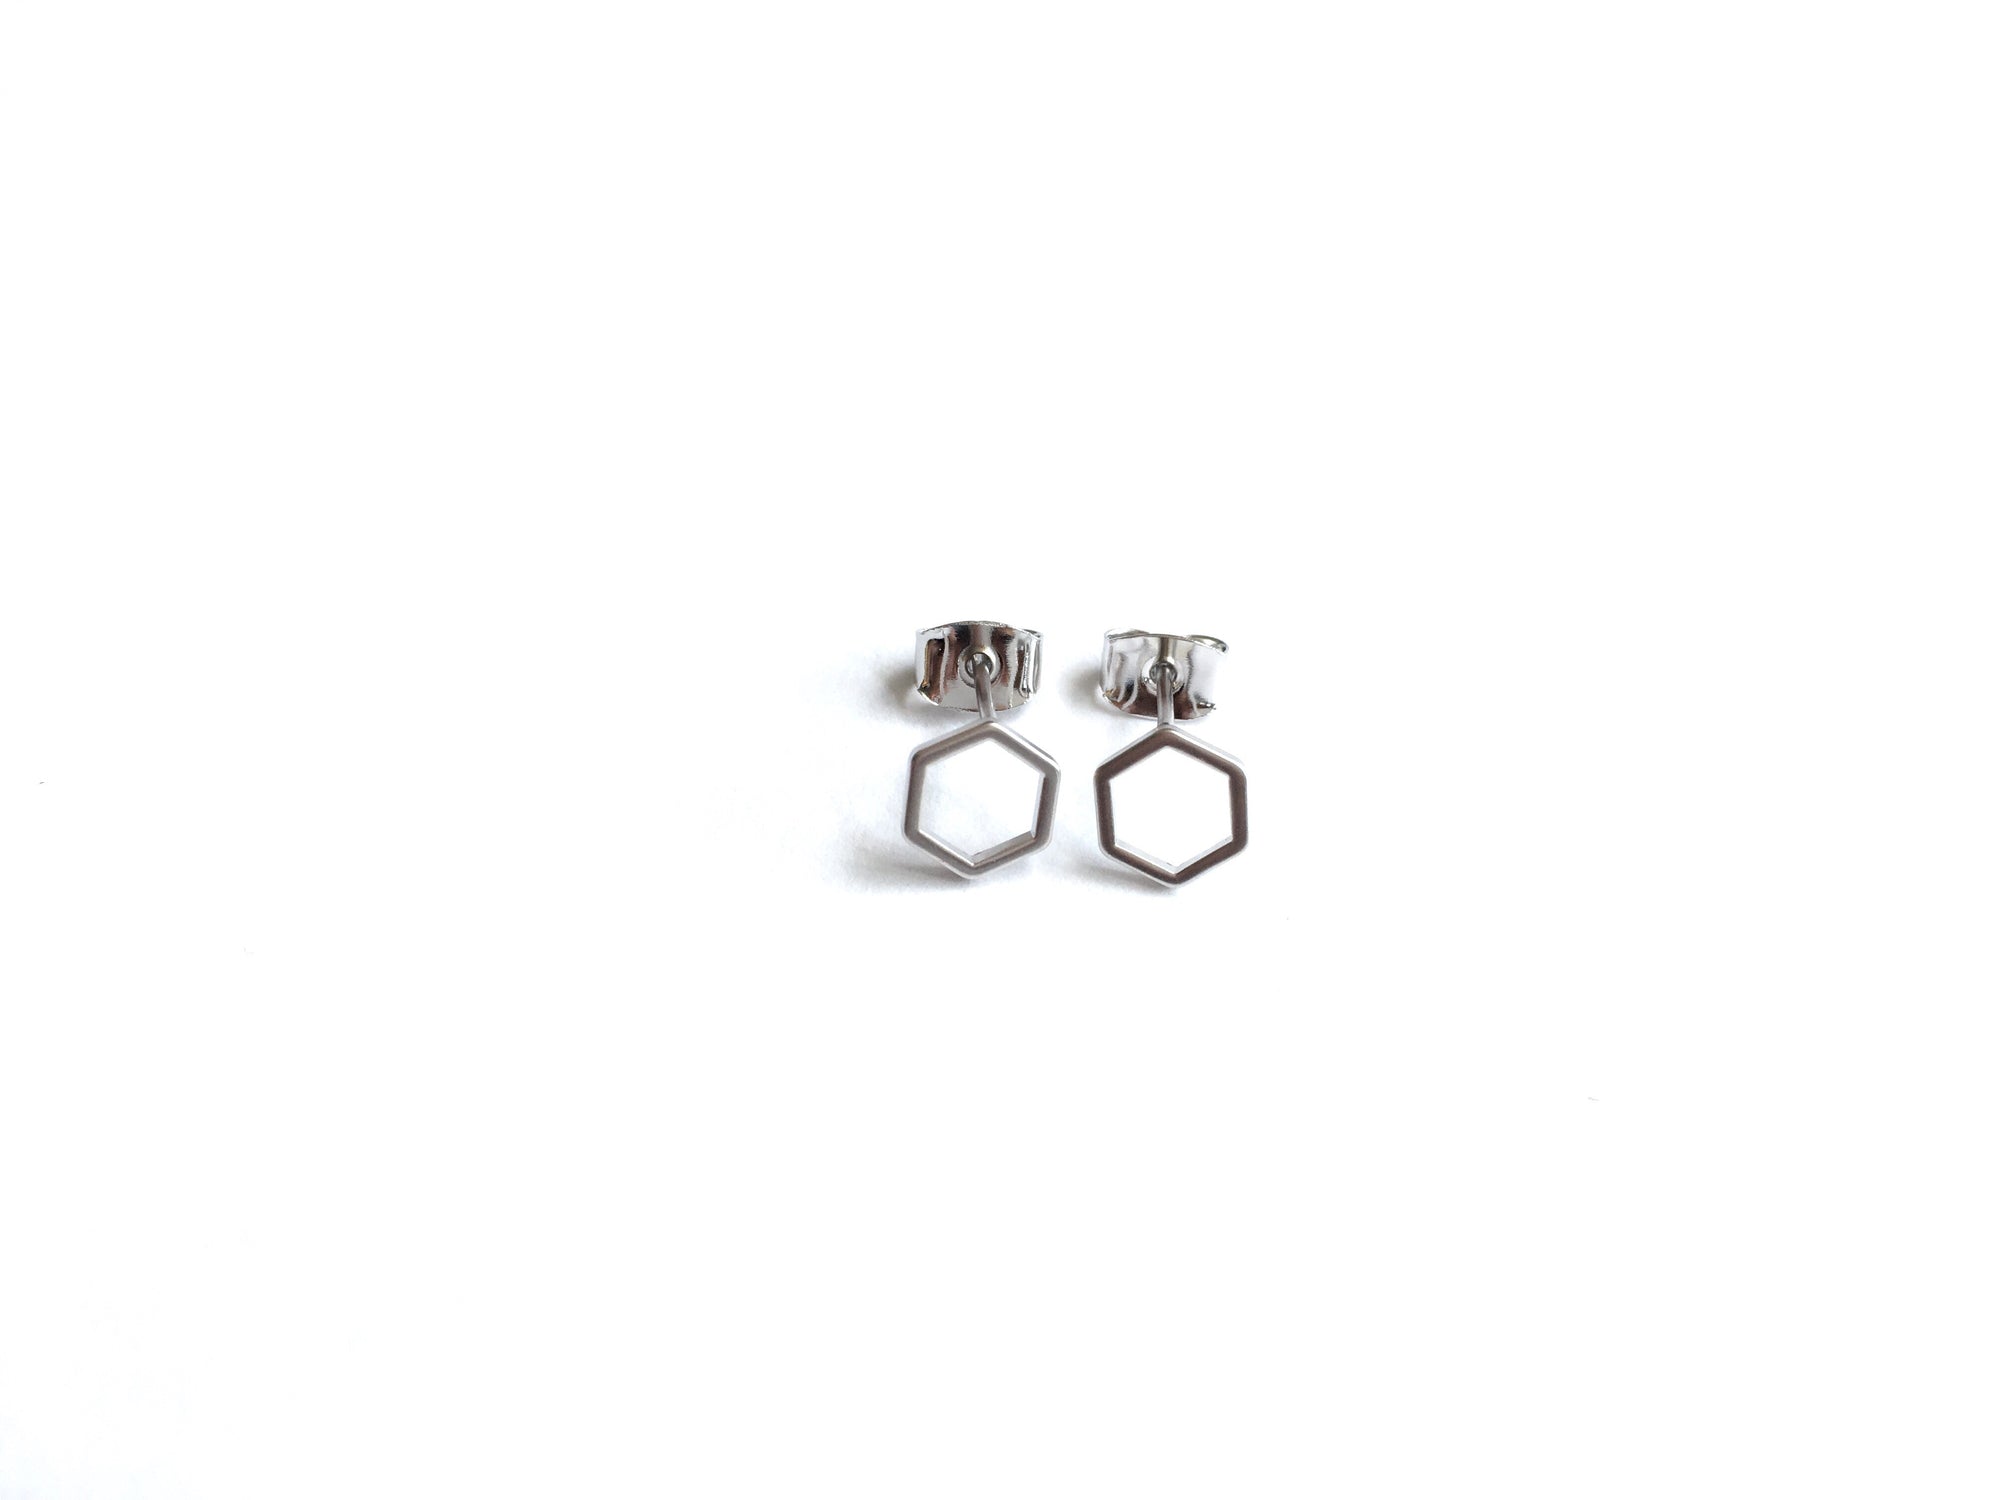 small open hexagon shaped stud earrings with a silver finish